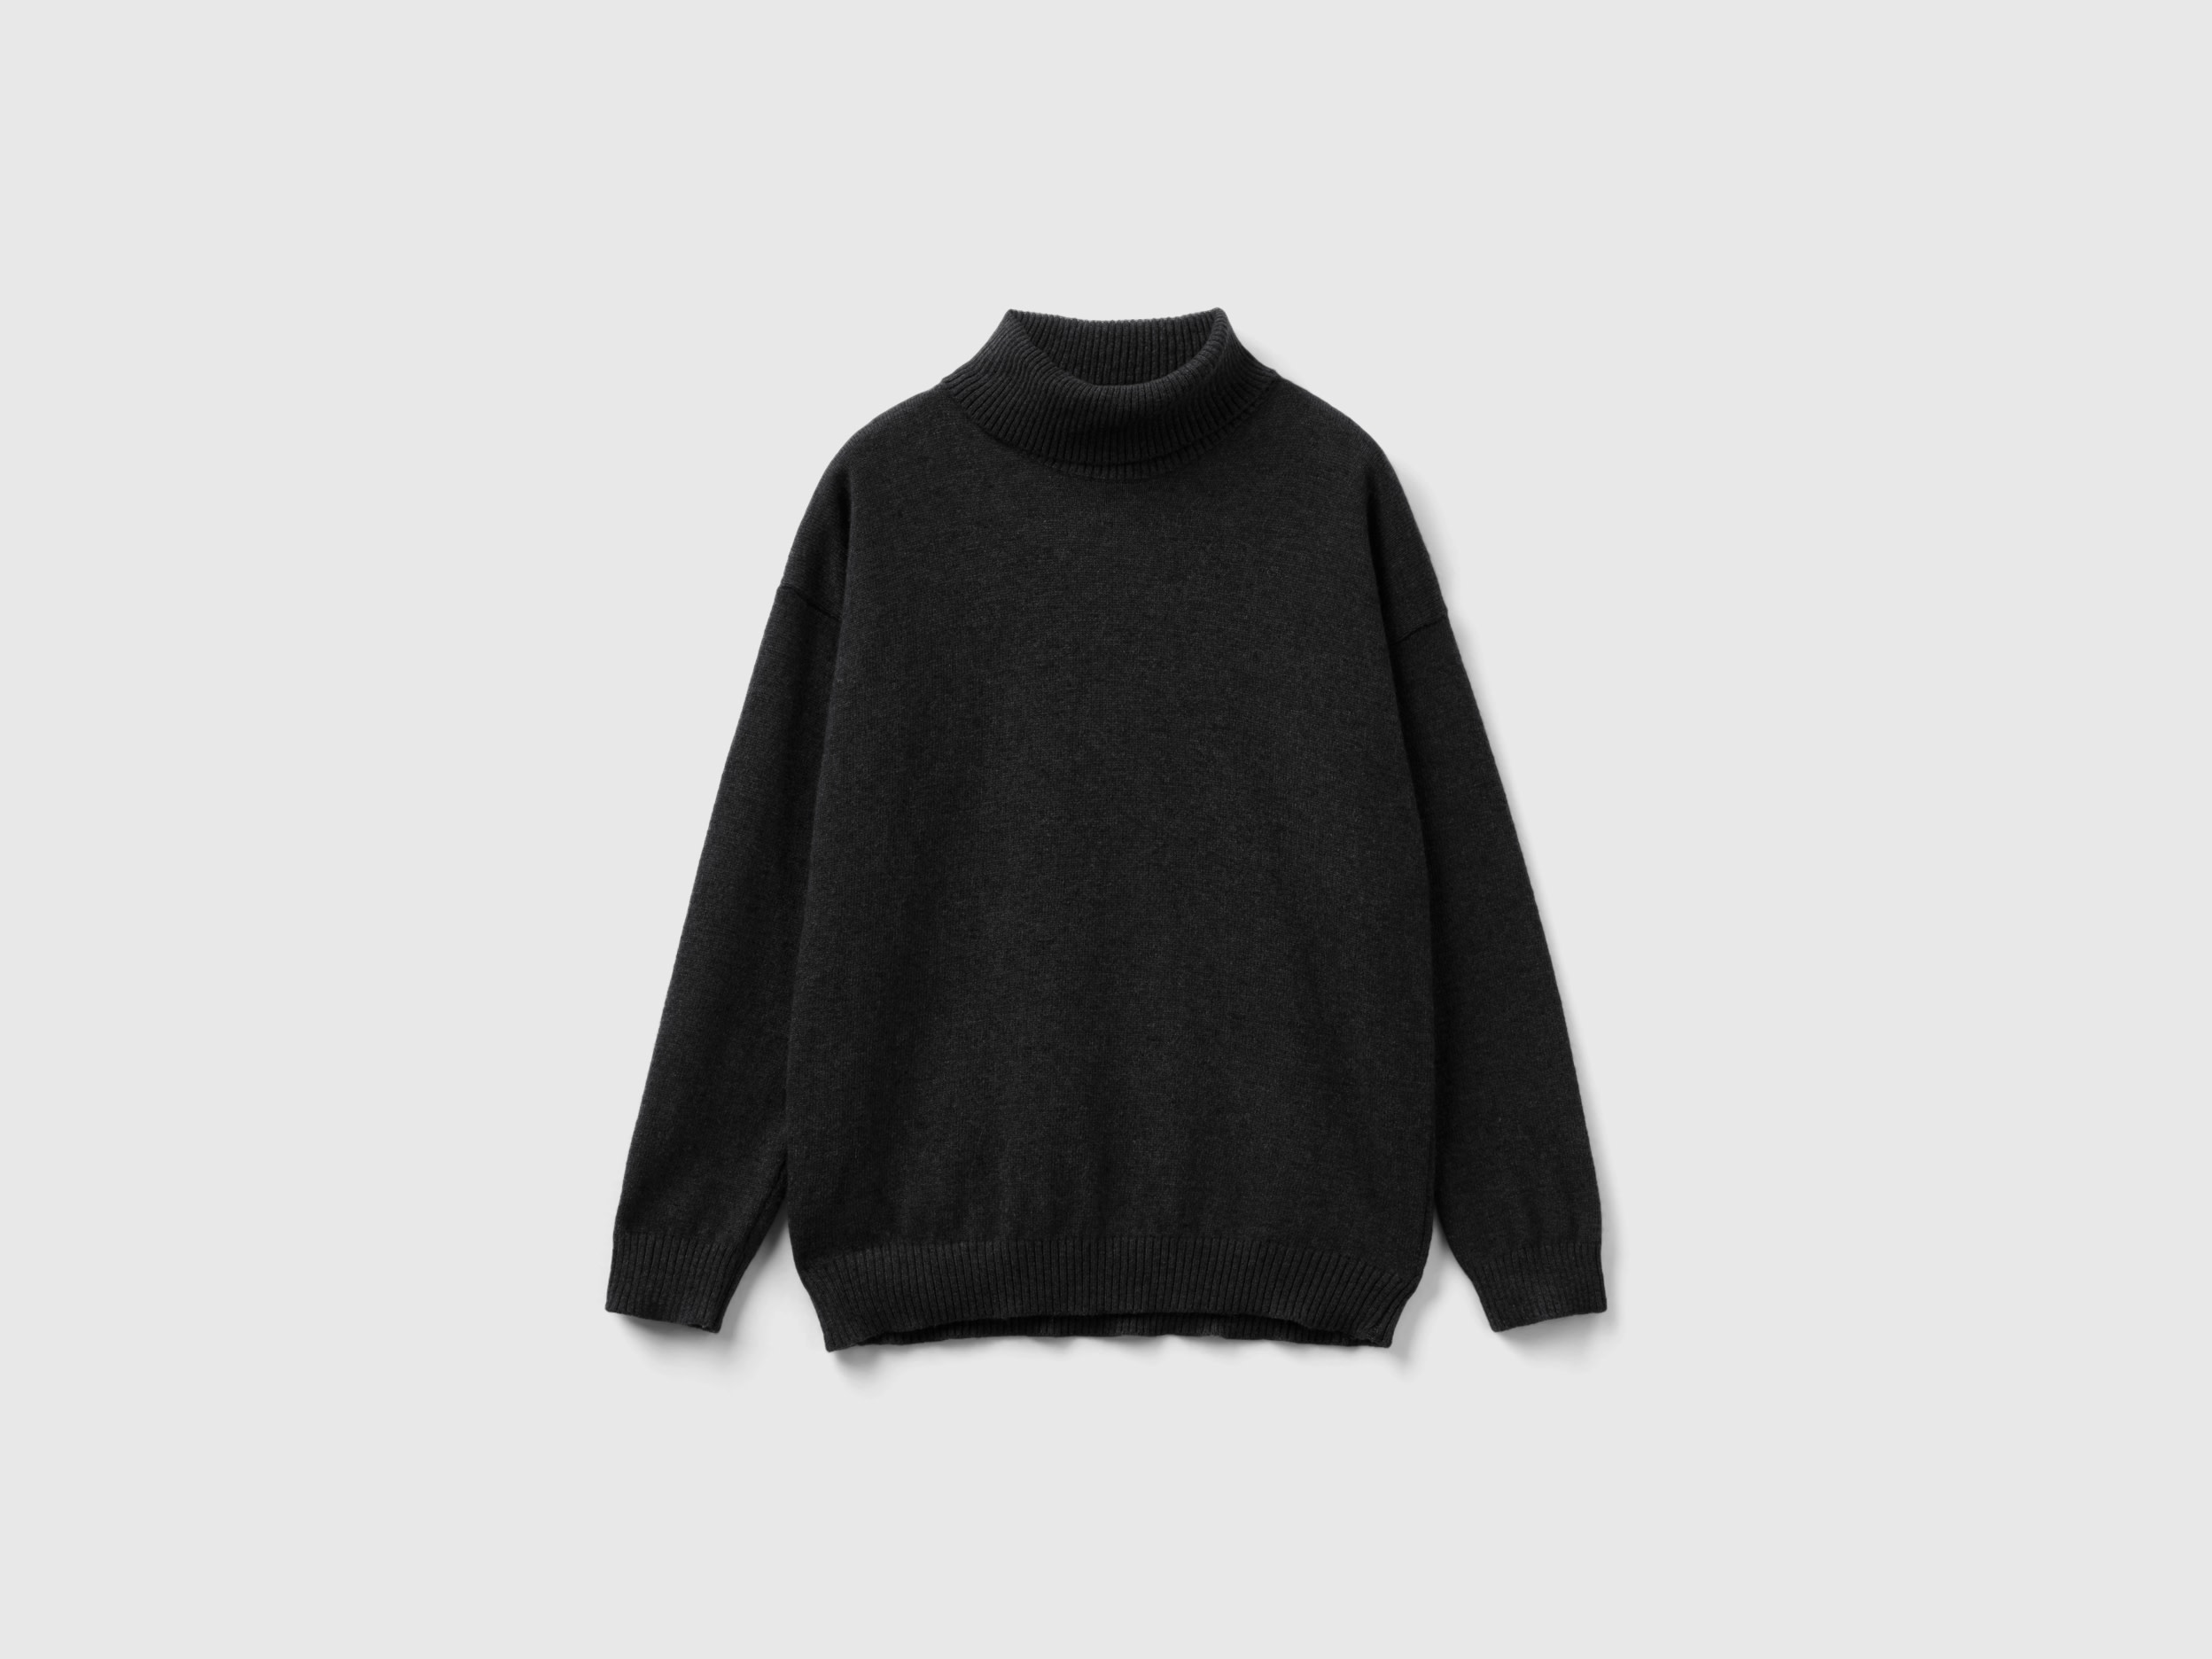 Benetton, Turtleneck Sweater In Cashmere And Wool Blend, size S, Black, Kids